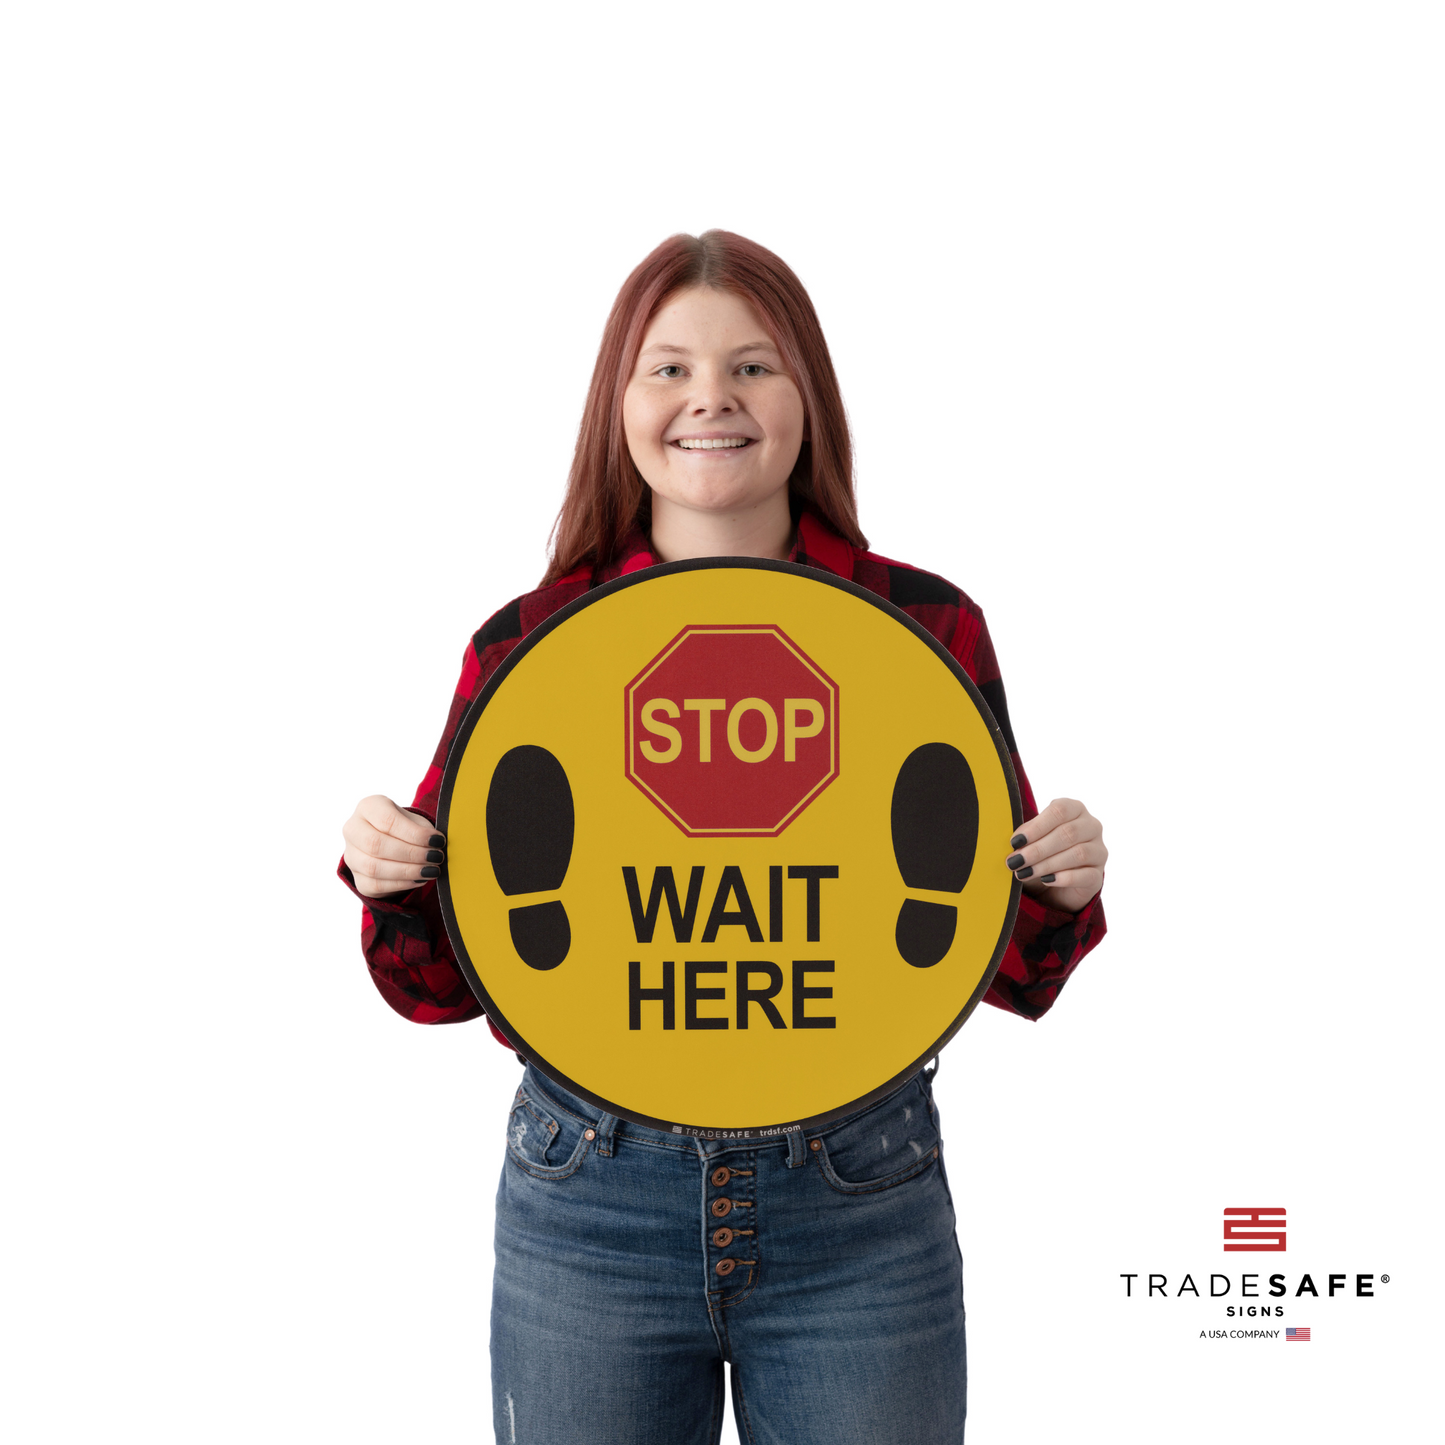 a person holding an adhesive vinyl sign with the text "stop wait here"